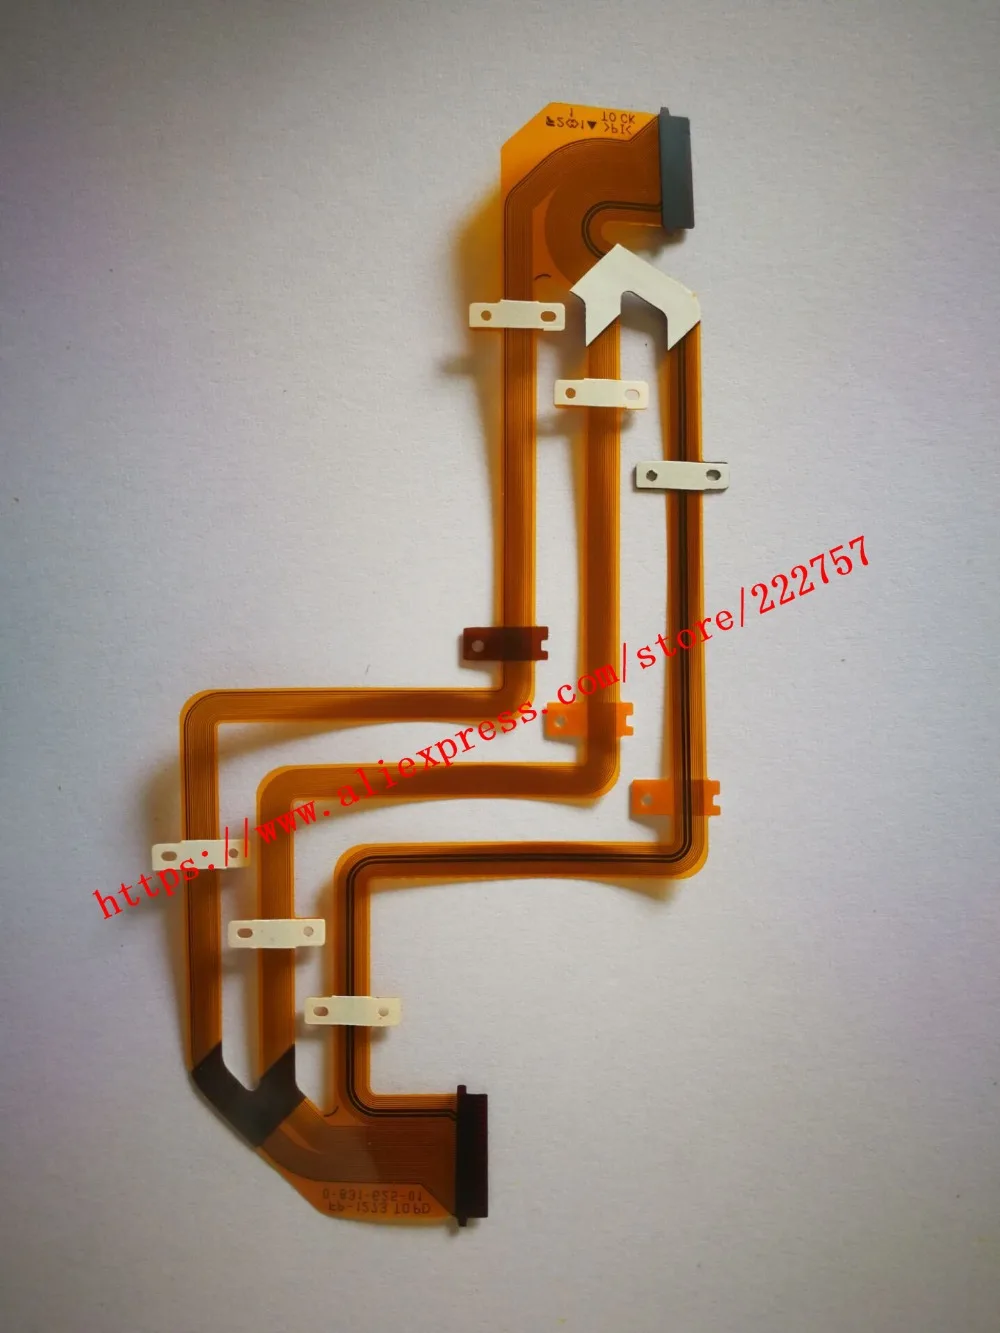 LCD Flex Cable For SONY NEX-VG10E VG10 Video Camera Repair Part FP-1273 USA 